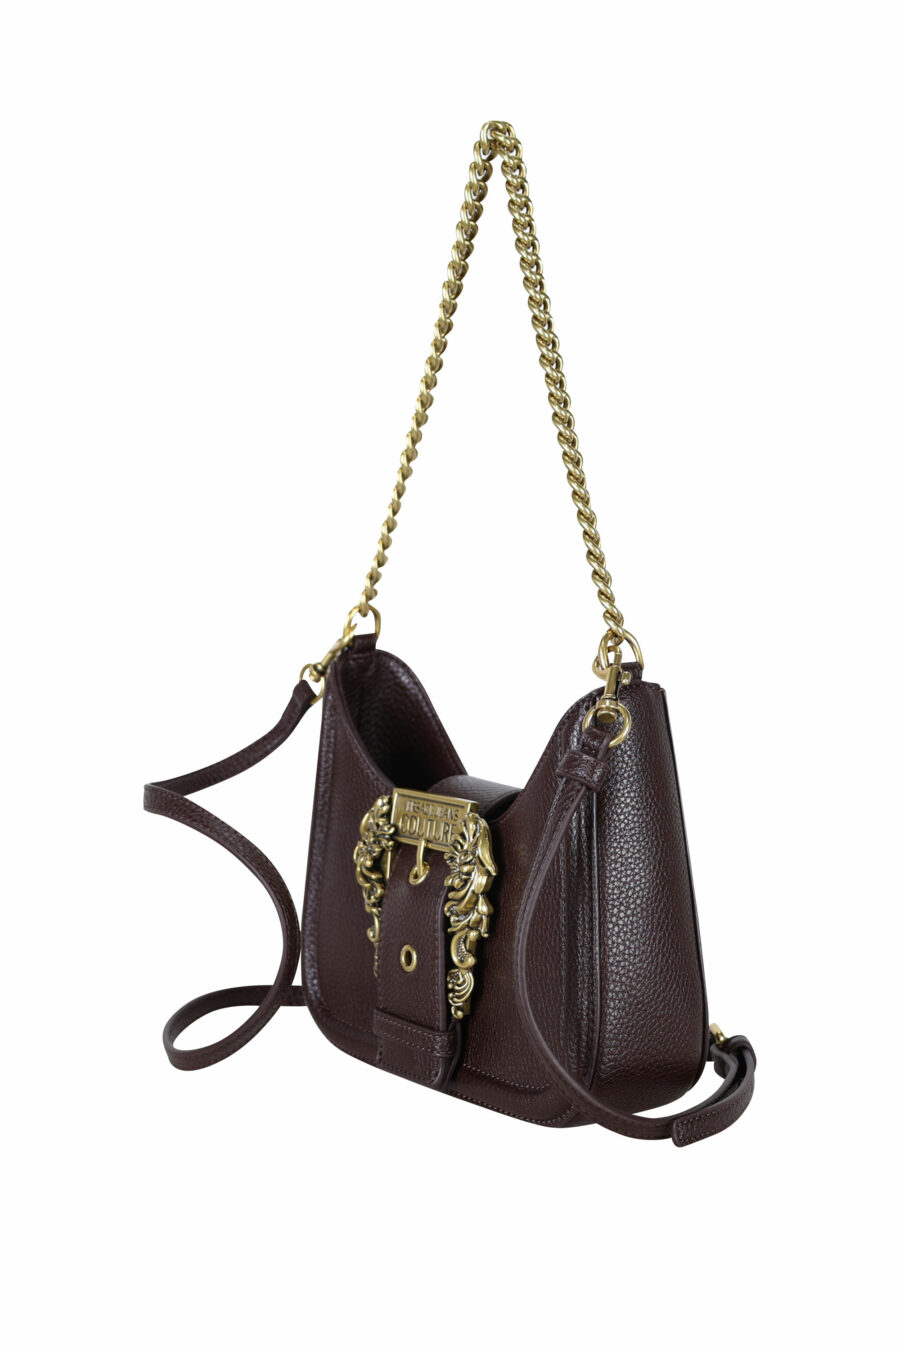 Brown hobo style shoulder bag with chain and baroque buckle - 8052019407556 1